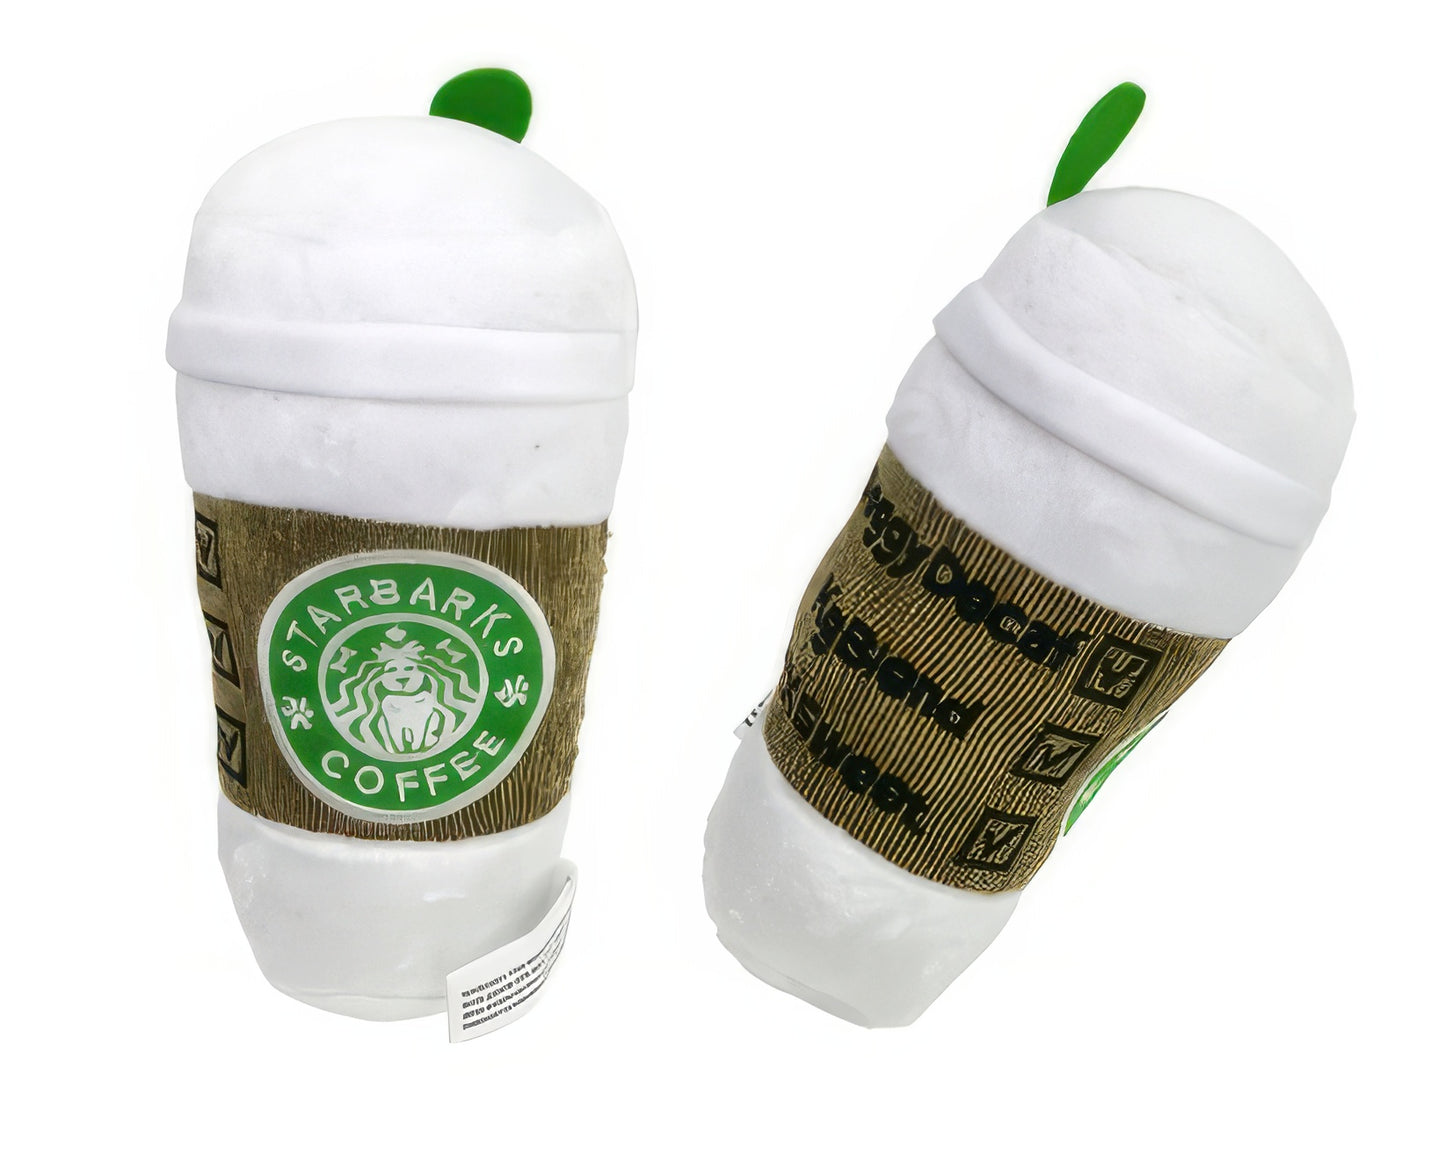 Luxury Pet Toy Starbarks Cup